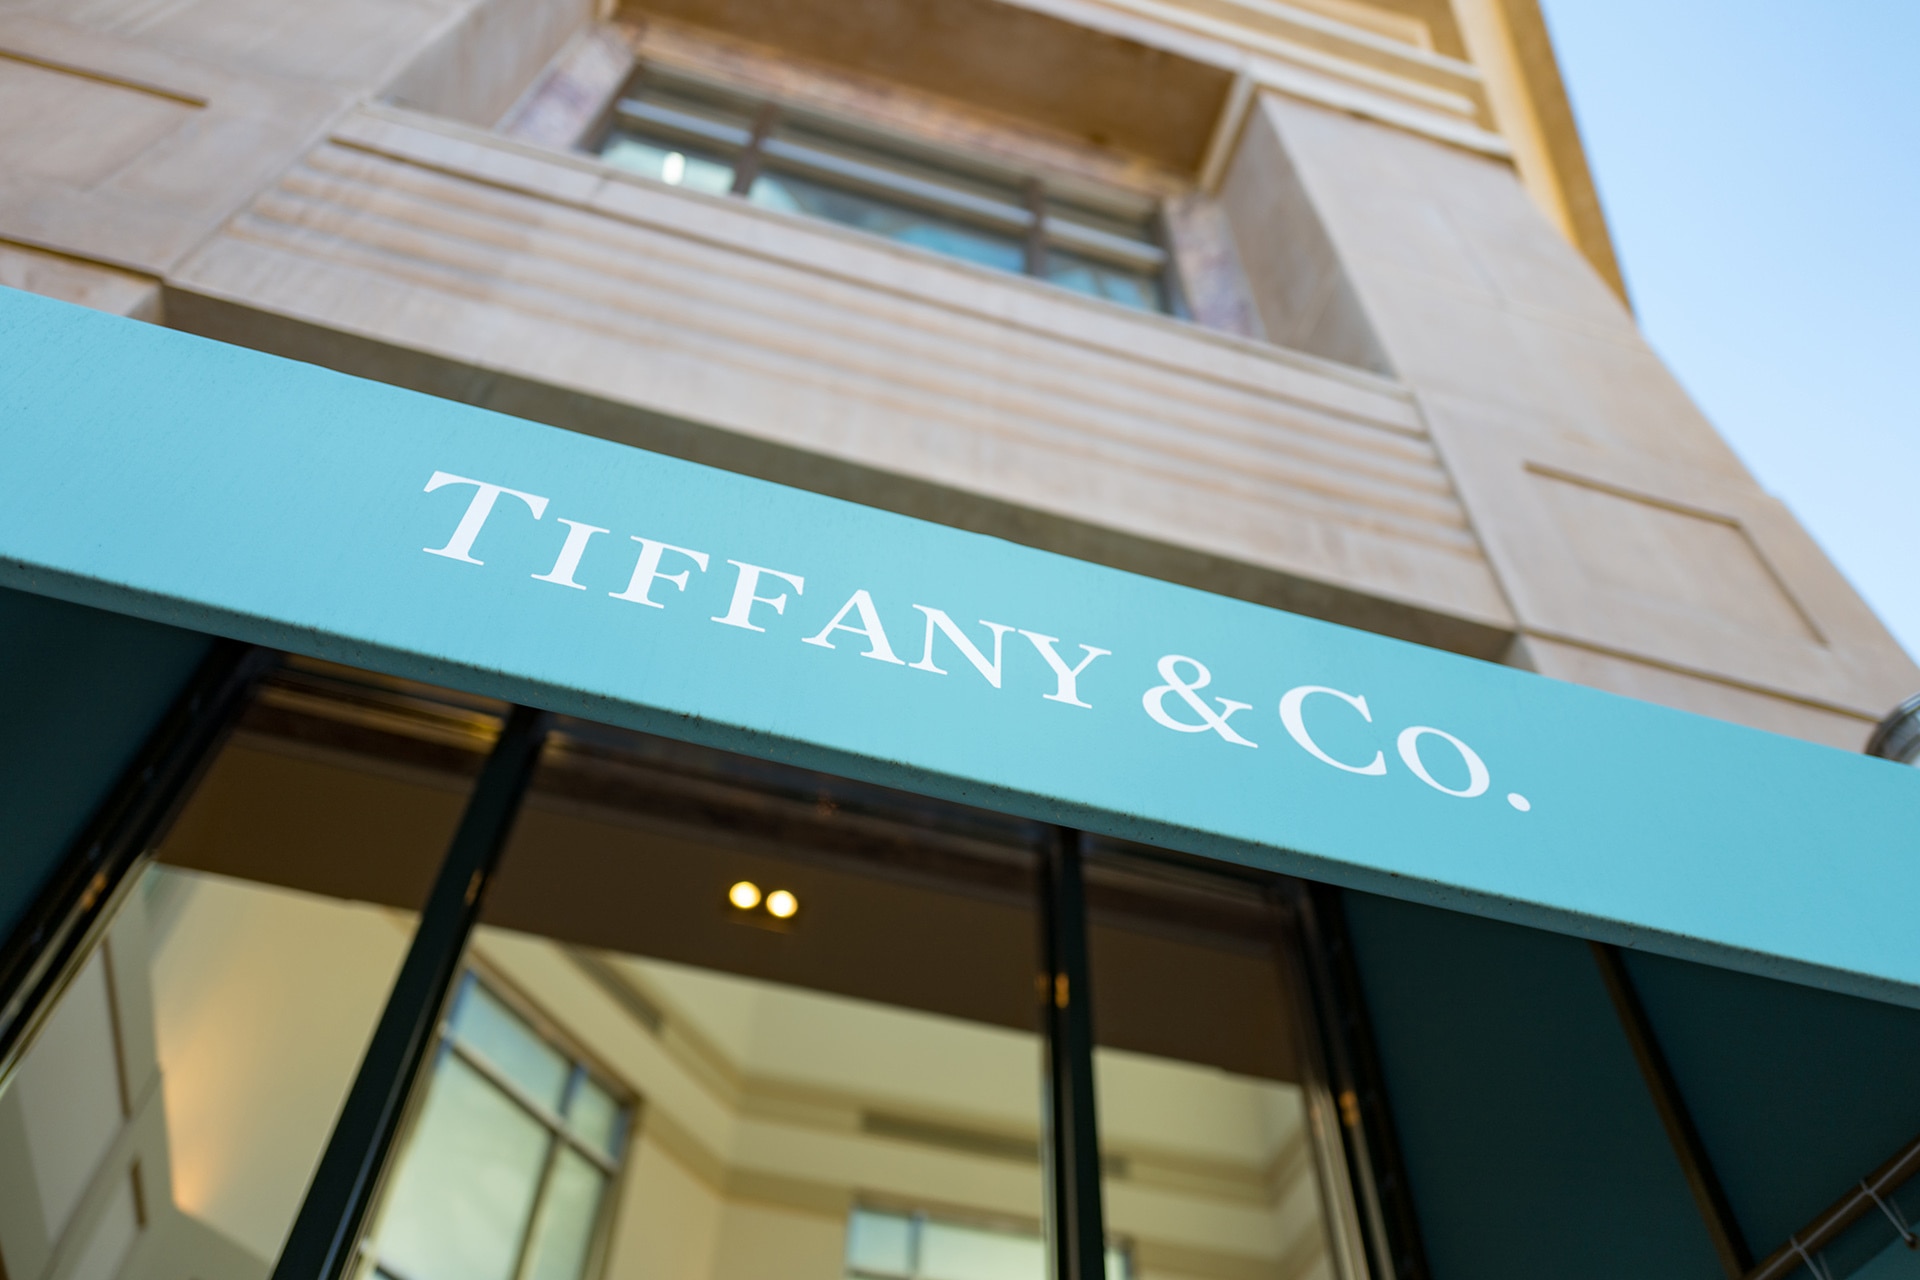 Tiffany Fires Back At LVMH Attempt To End Merger Deal, Saying